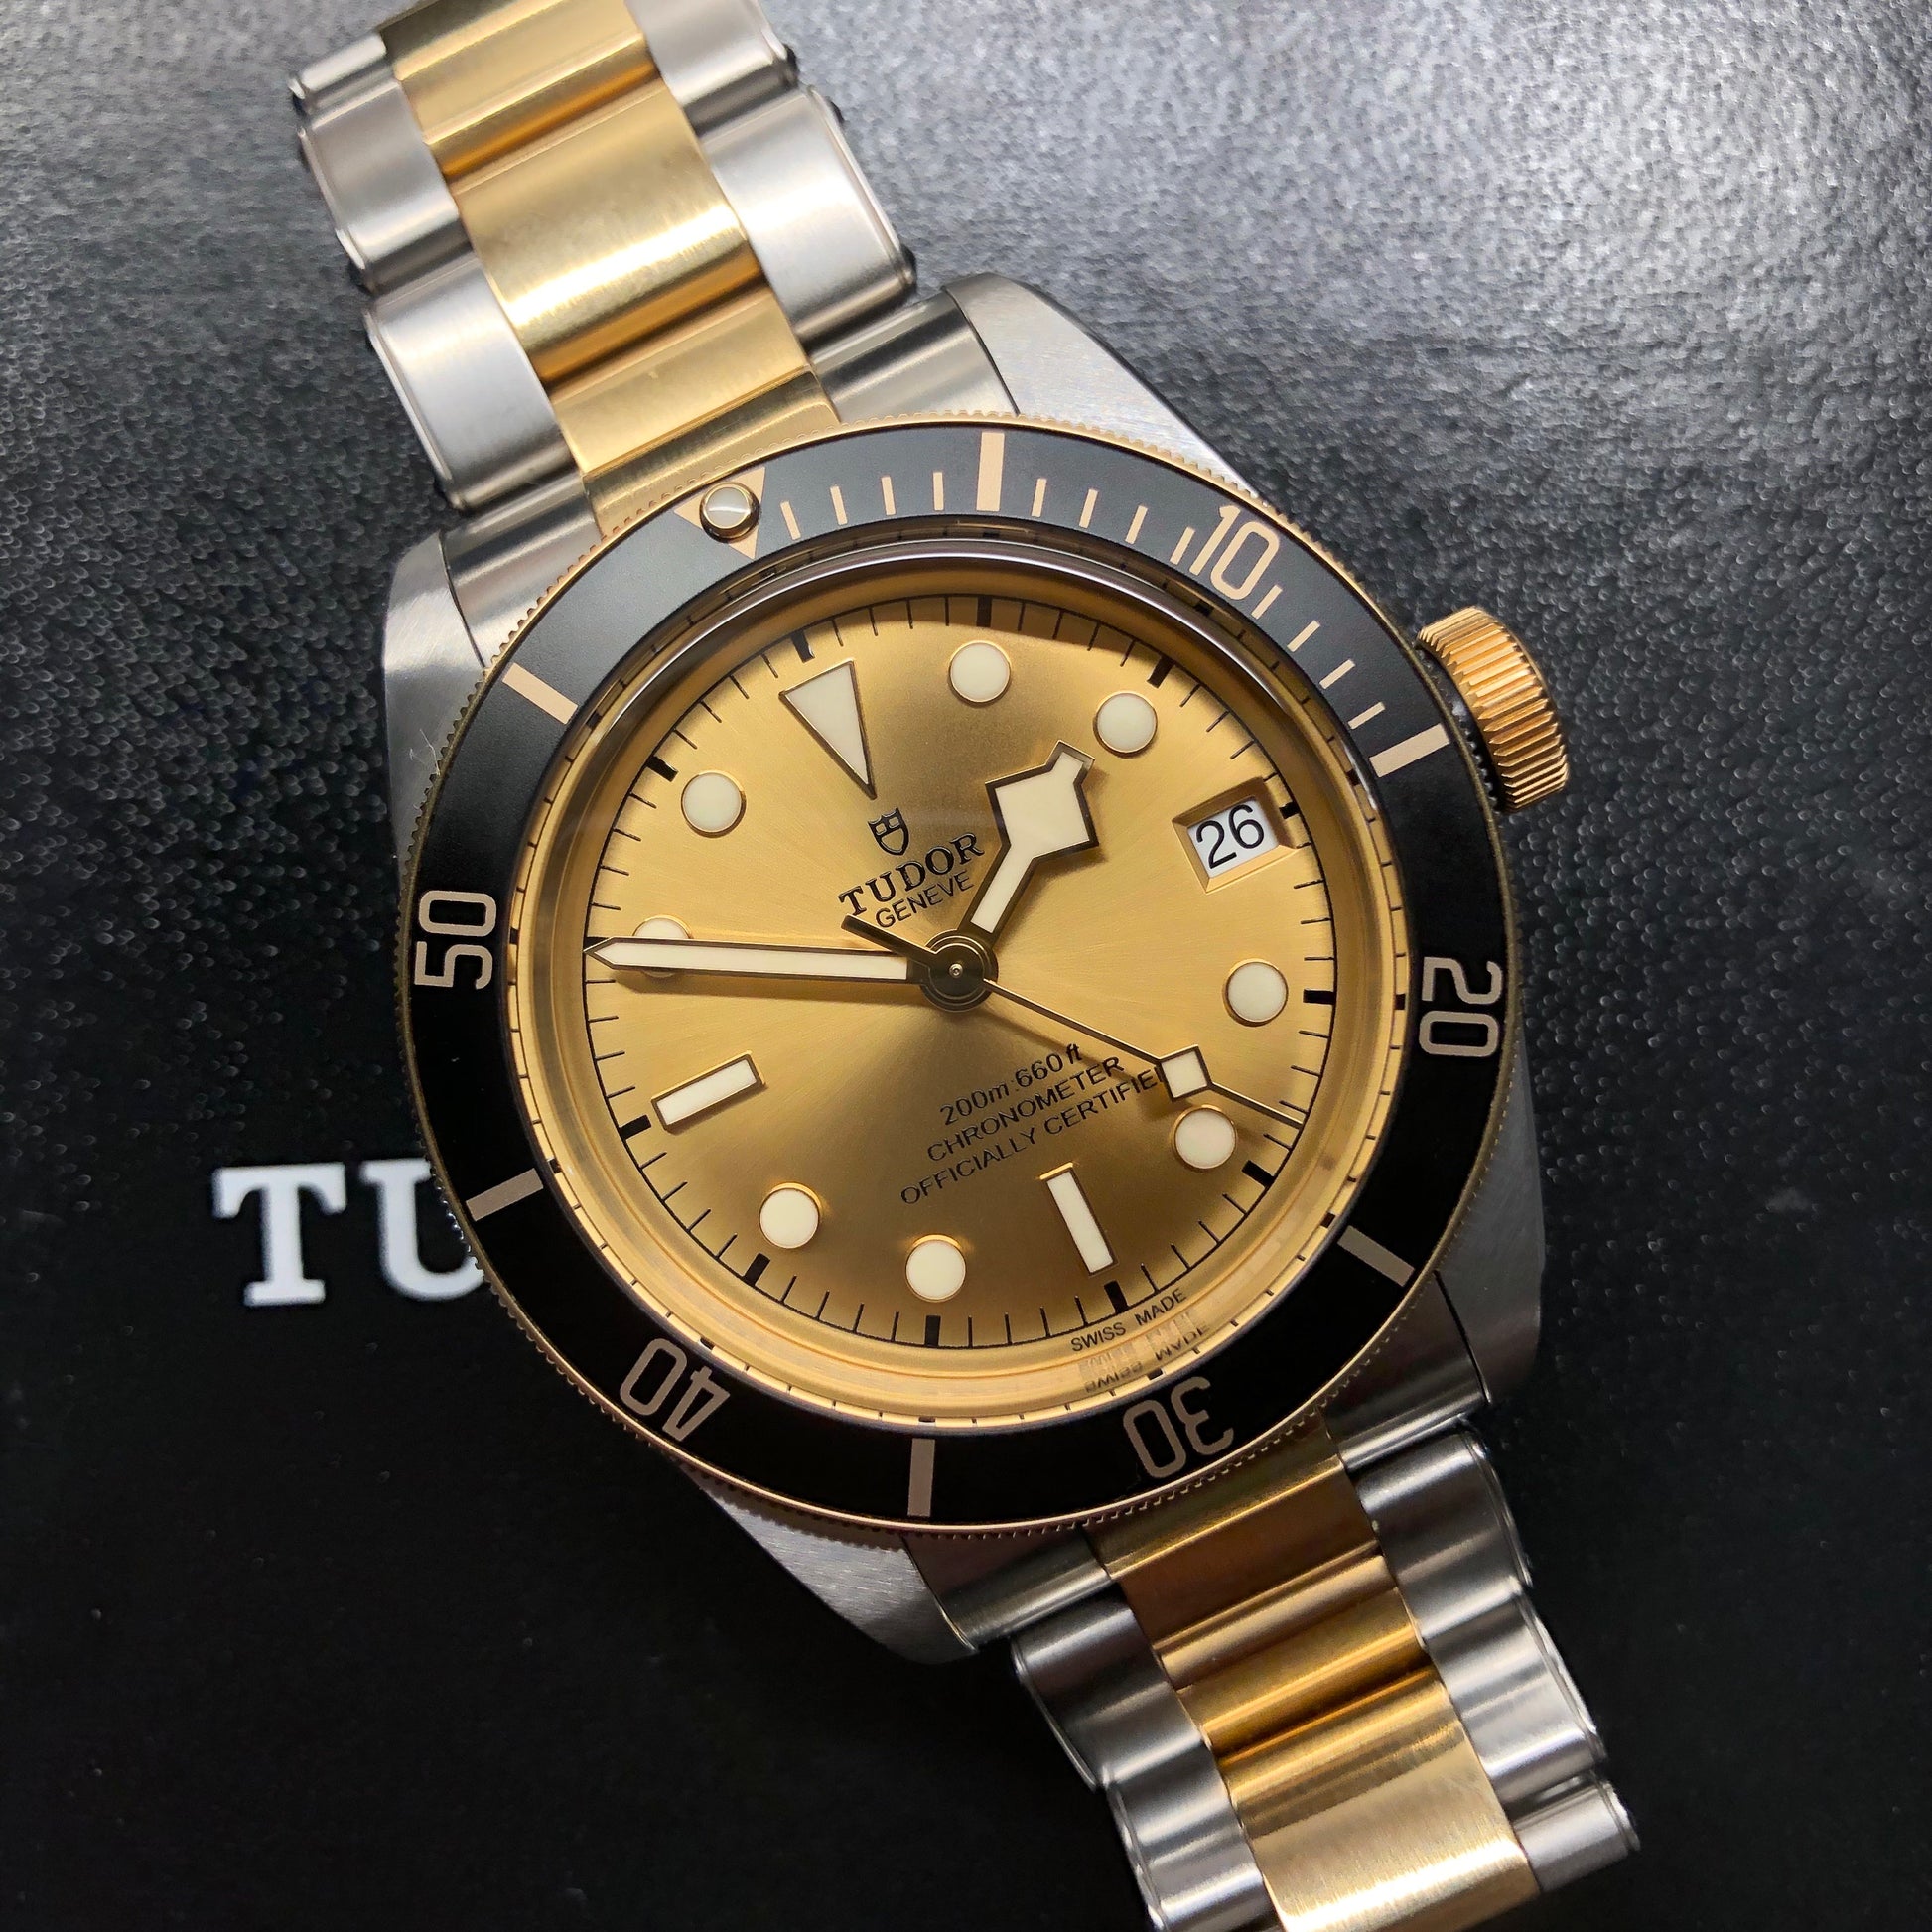 2020 Tudor Heritage Black 79733N Bay Two Tone Steel Gold Automatic 41mm Men's Wristwatch - Hashtag Watch Company